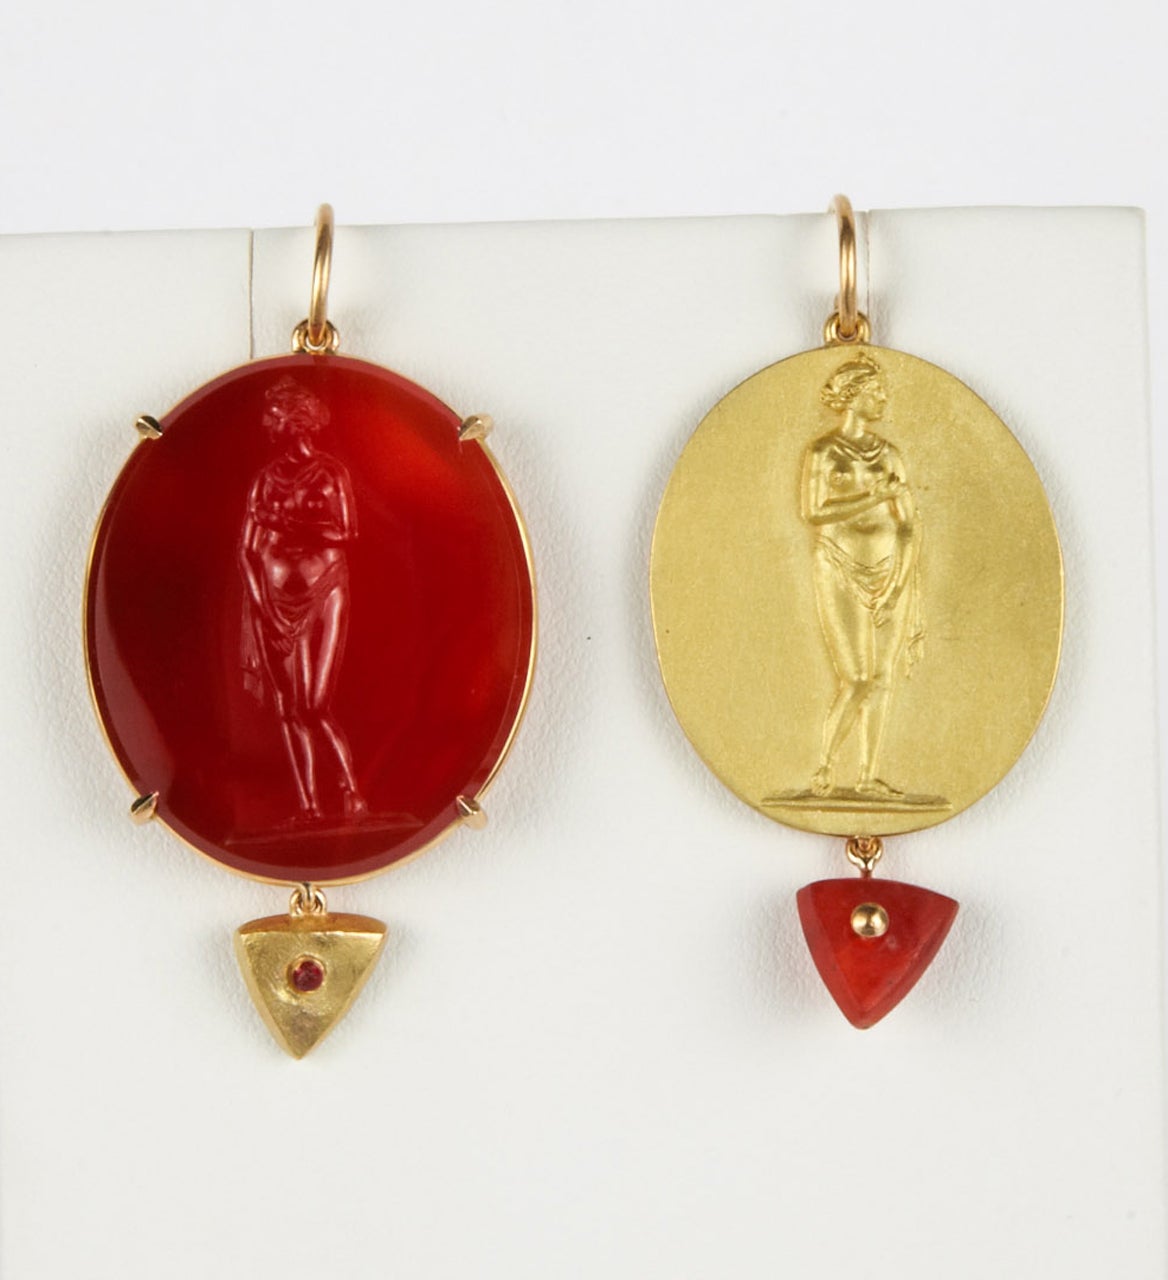 Pair of 18K gold earrings set on one side with an oval carnelian intaglio representing the Medici Venus, Italy, 1750-1820, (Provenance: collection of Robertson Davies,1913-1995), on the other side with the intaglio's impression in gold, each one